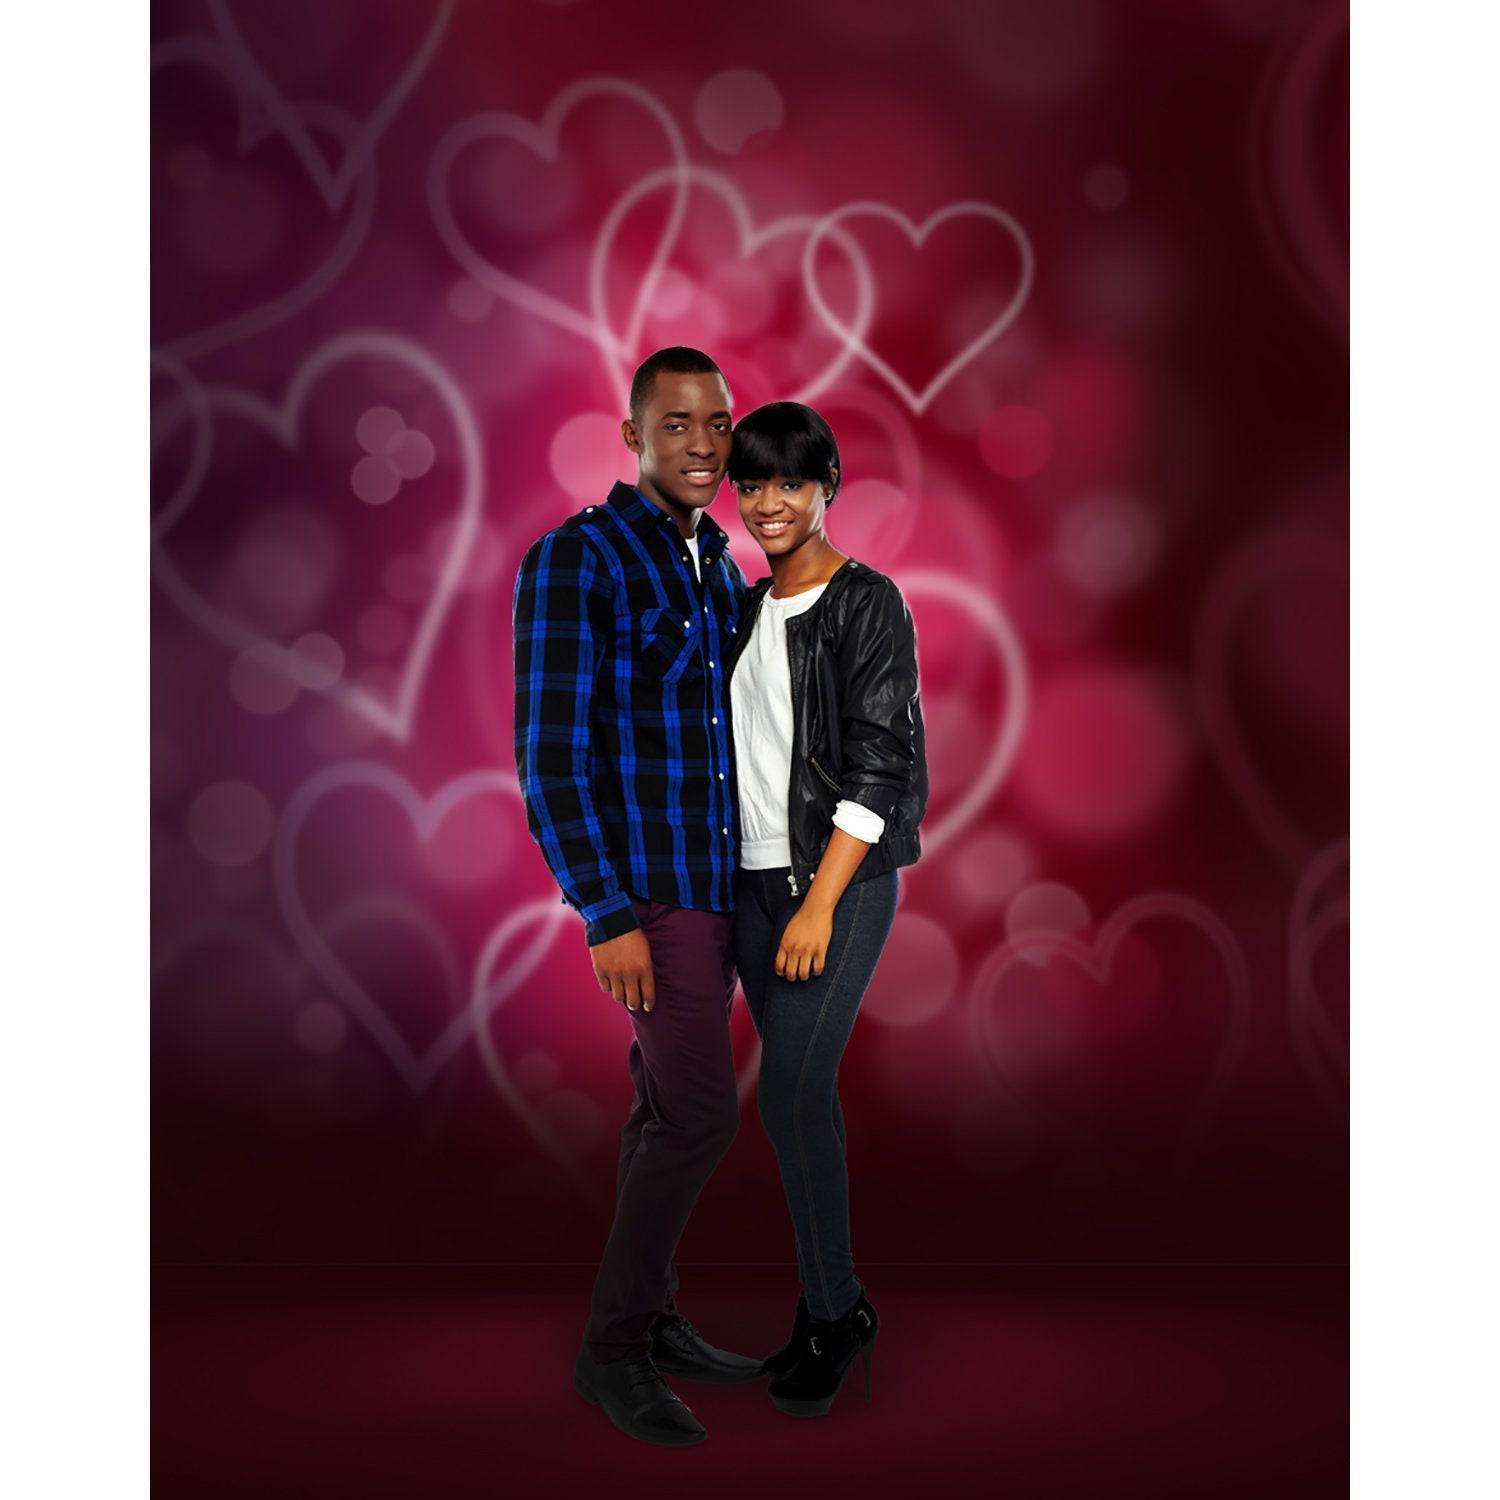 Red Hearts Love Valentine Backdrop for Photography VAT-31